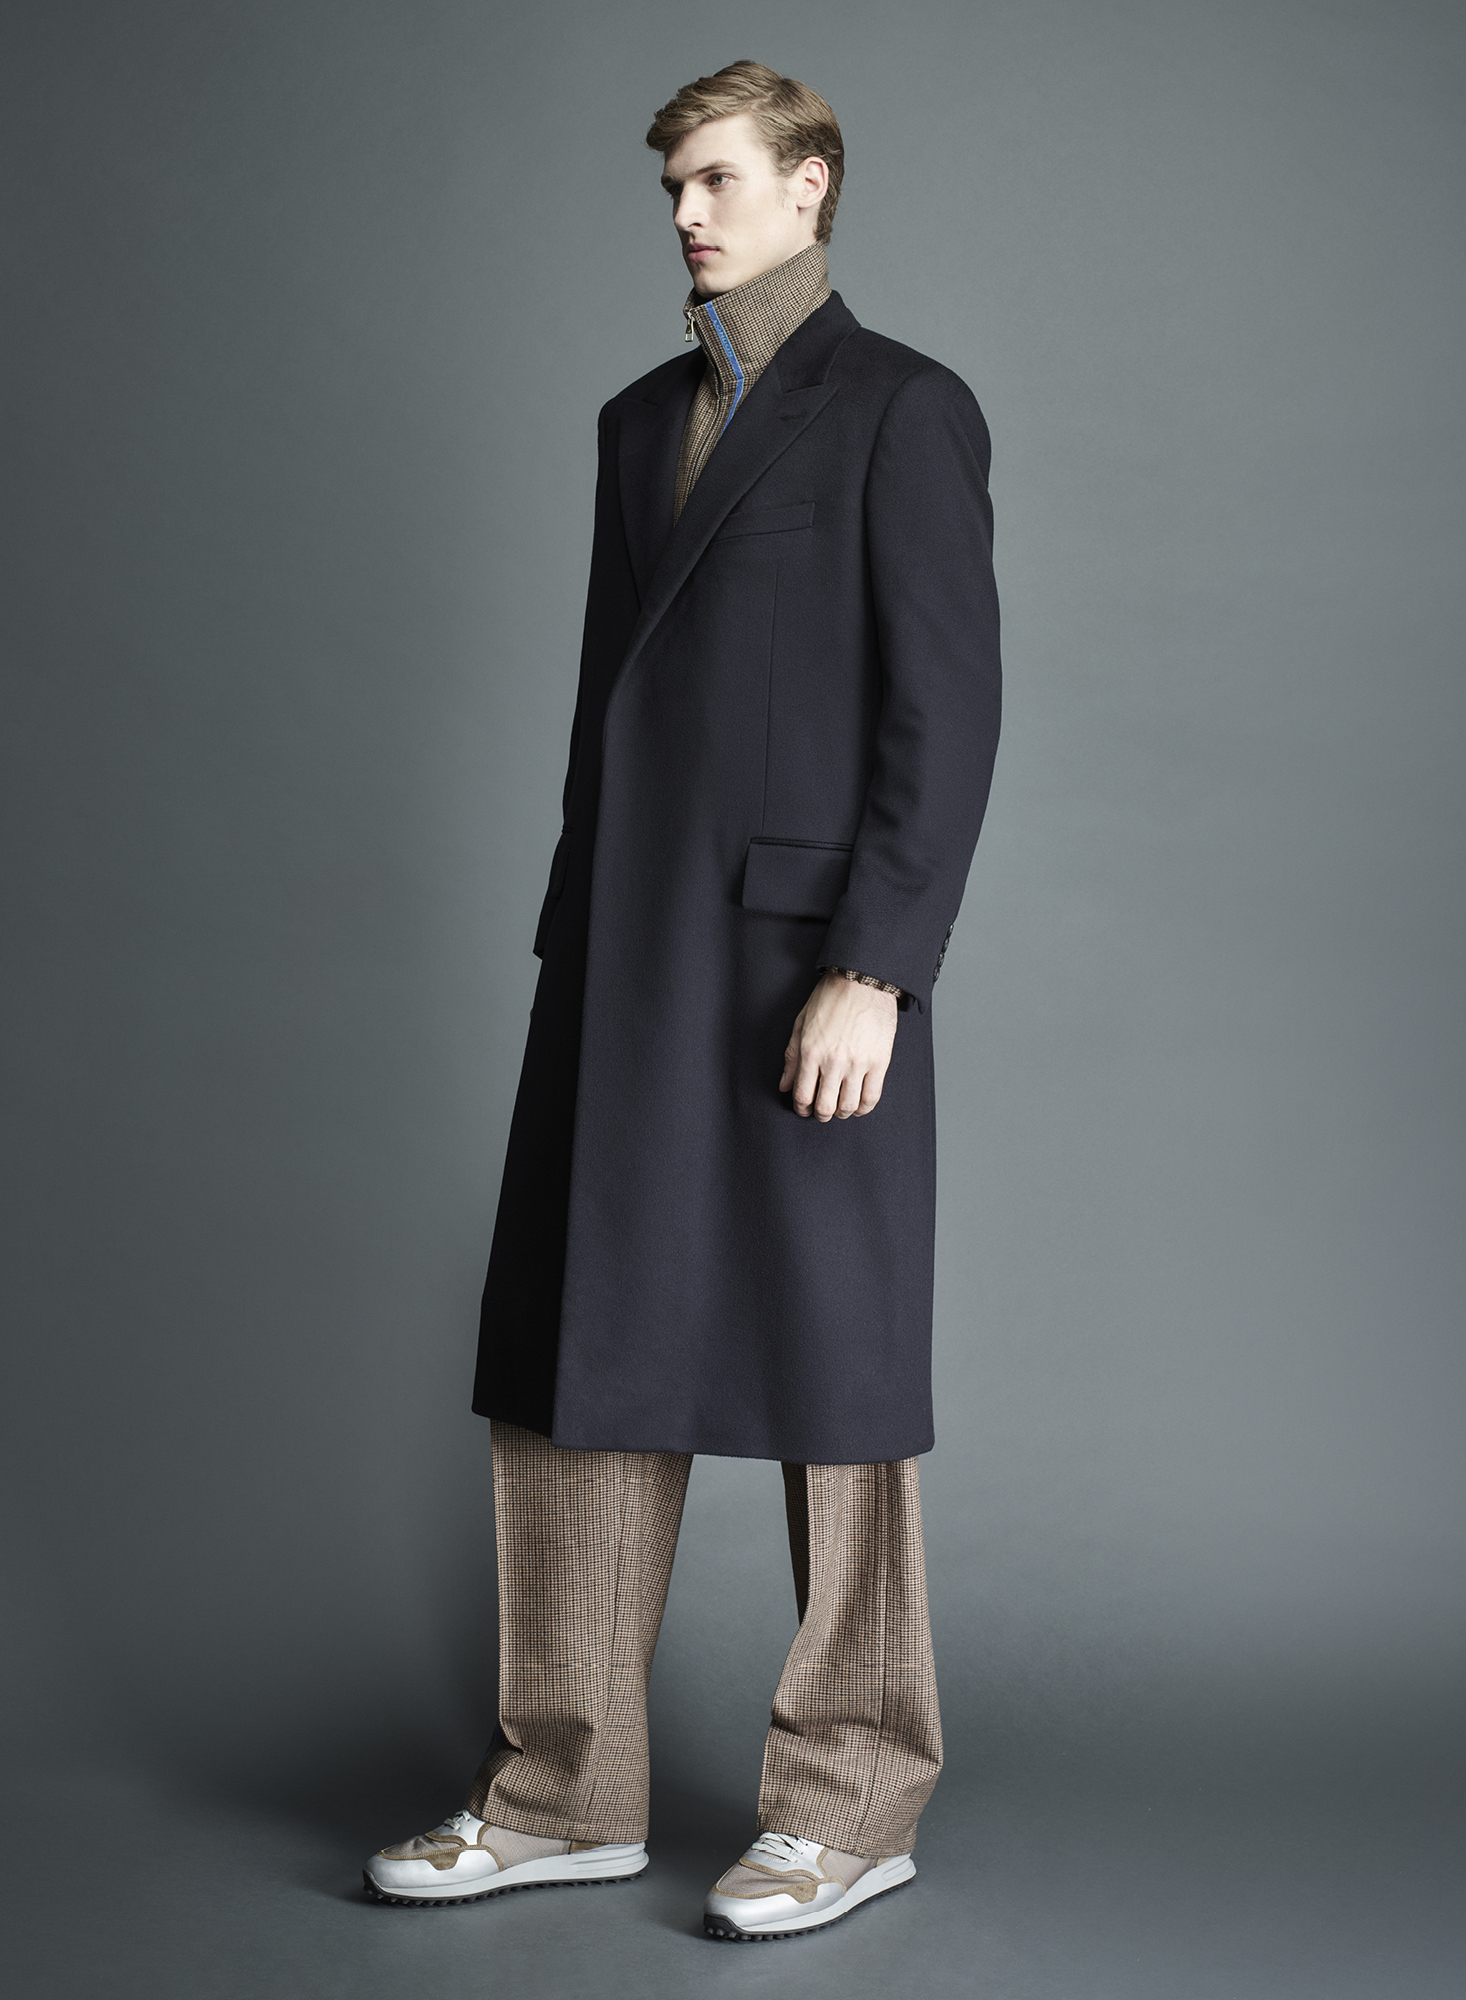 Five ways: How to wear the overcoat x Dunhill